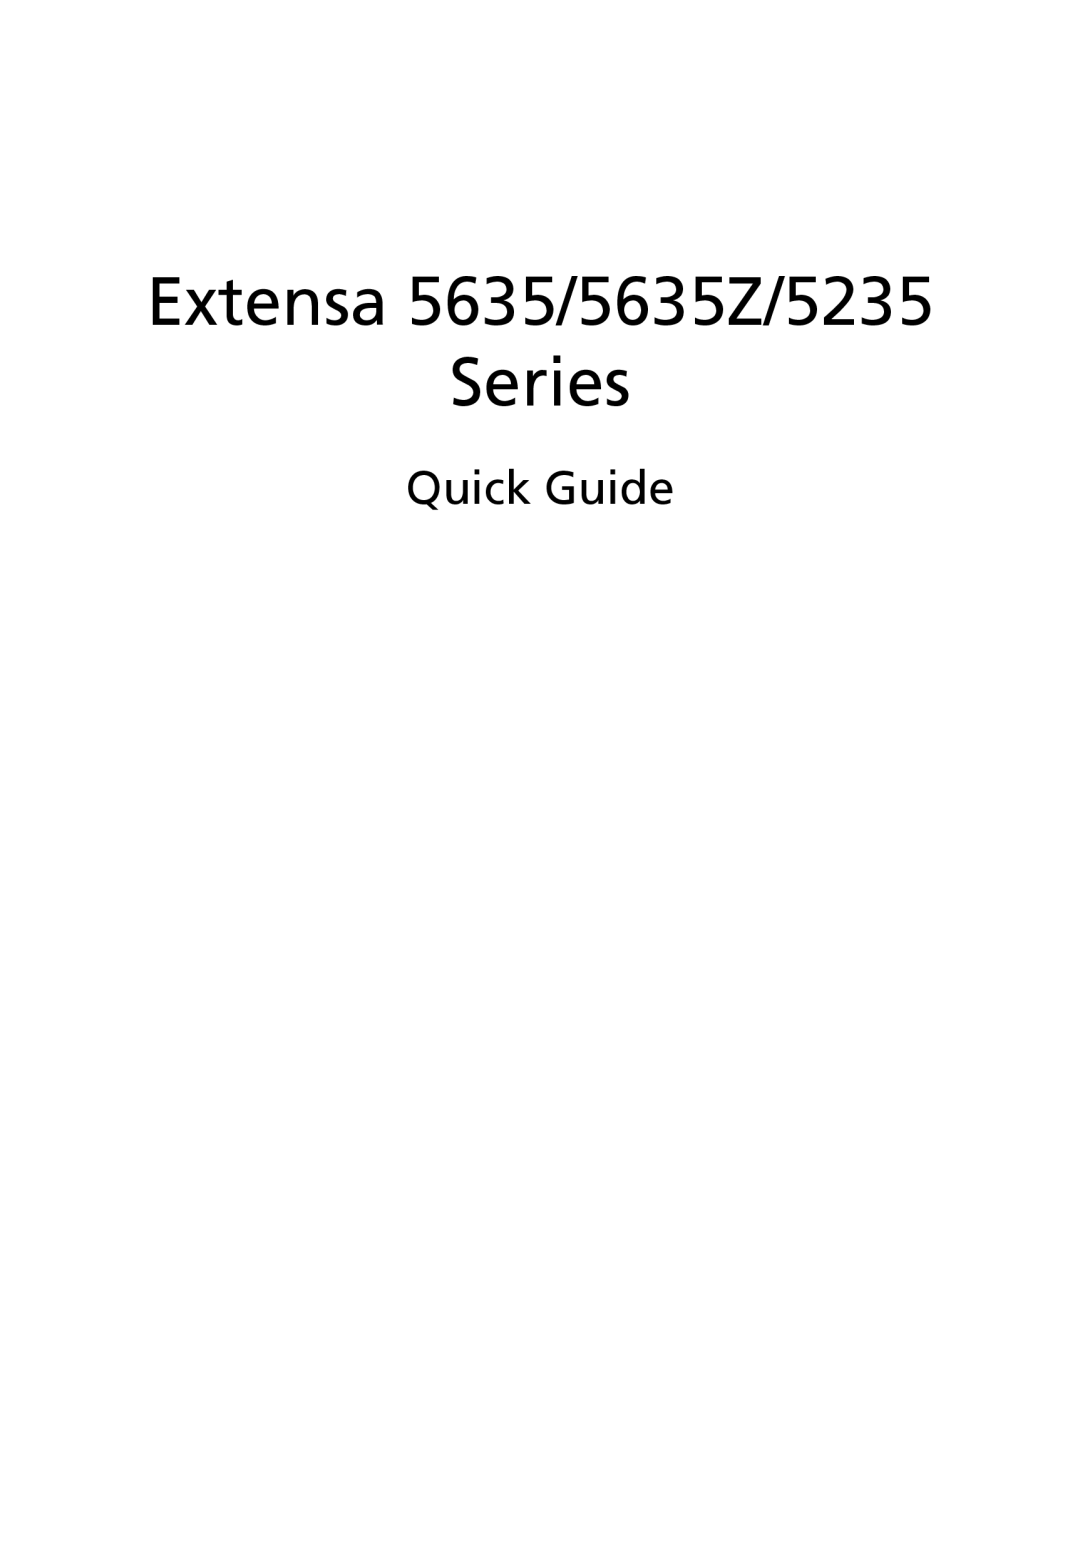 Acer 5635Z Series, 5635 Series manual Extensa 5635/5635Z/5235 Series, Quick Guide 